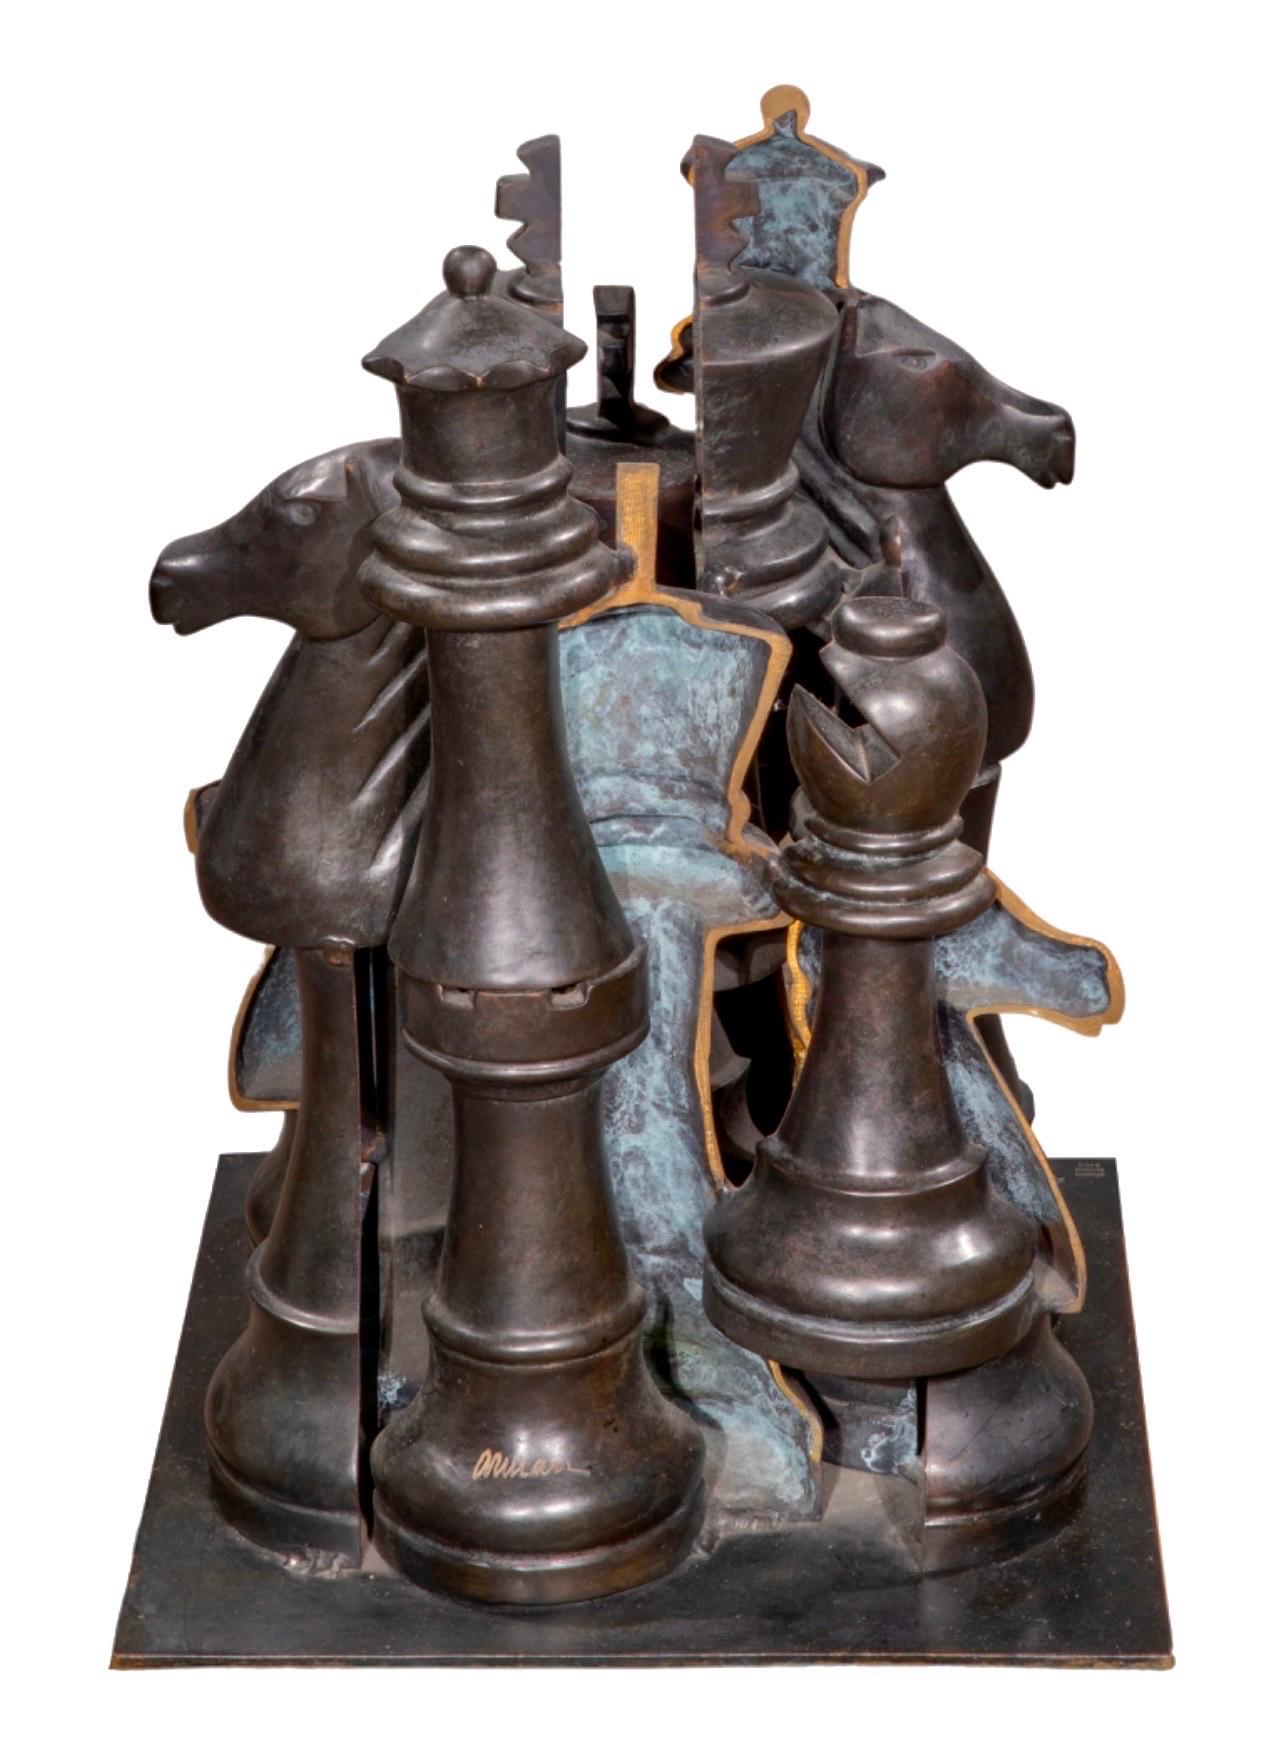 Arman, French American (1928-2005)
Gambit  (Chess pieces)
Cast Bronze Sculpture with patina
Incised signature near lower edge, 48/70 with 
impressed "Bronze Romain & Fils" foundry mark  
Dimensions: (approximate) 17 X 13 X 12 inches

On a flat,